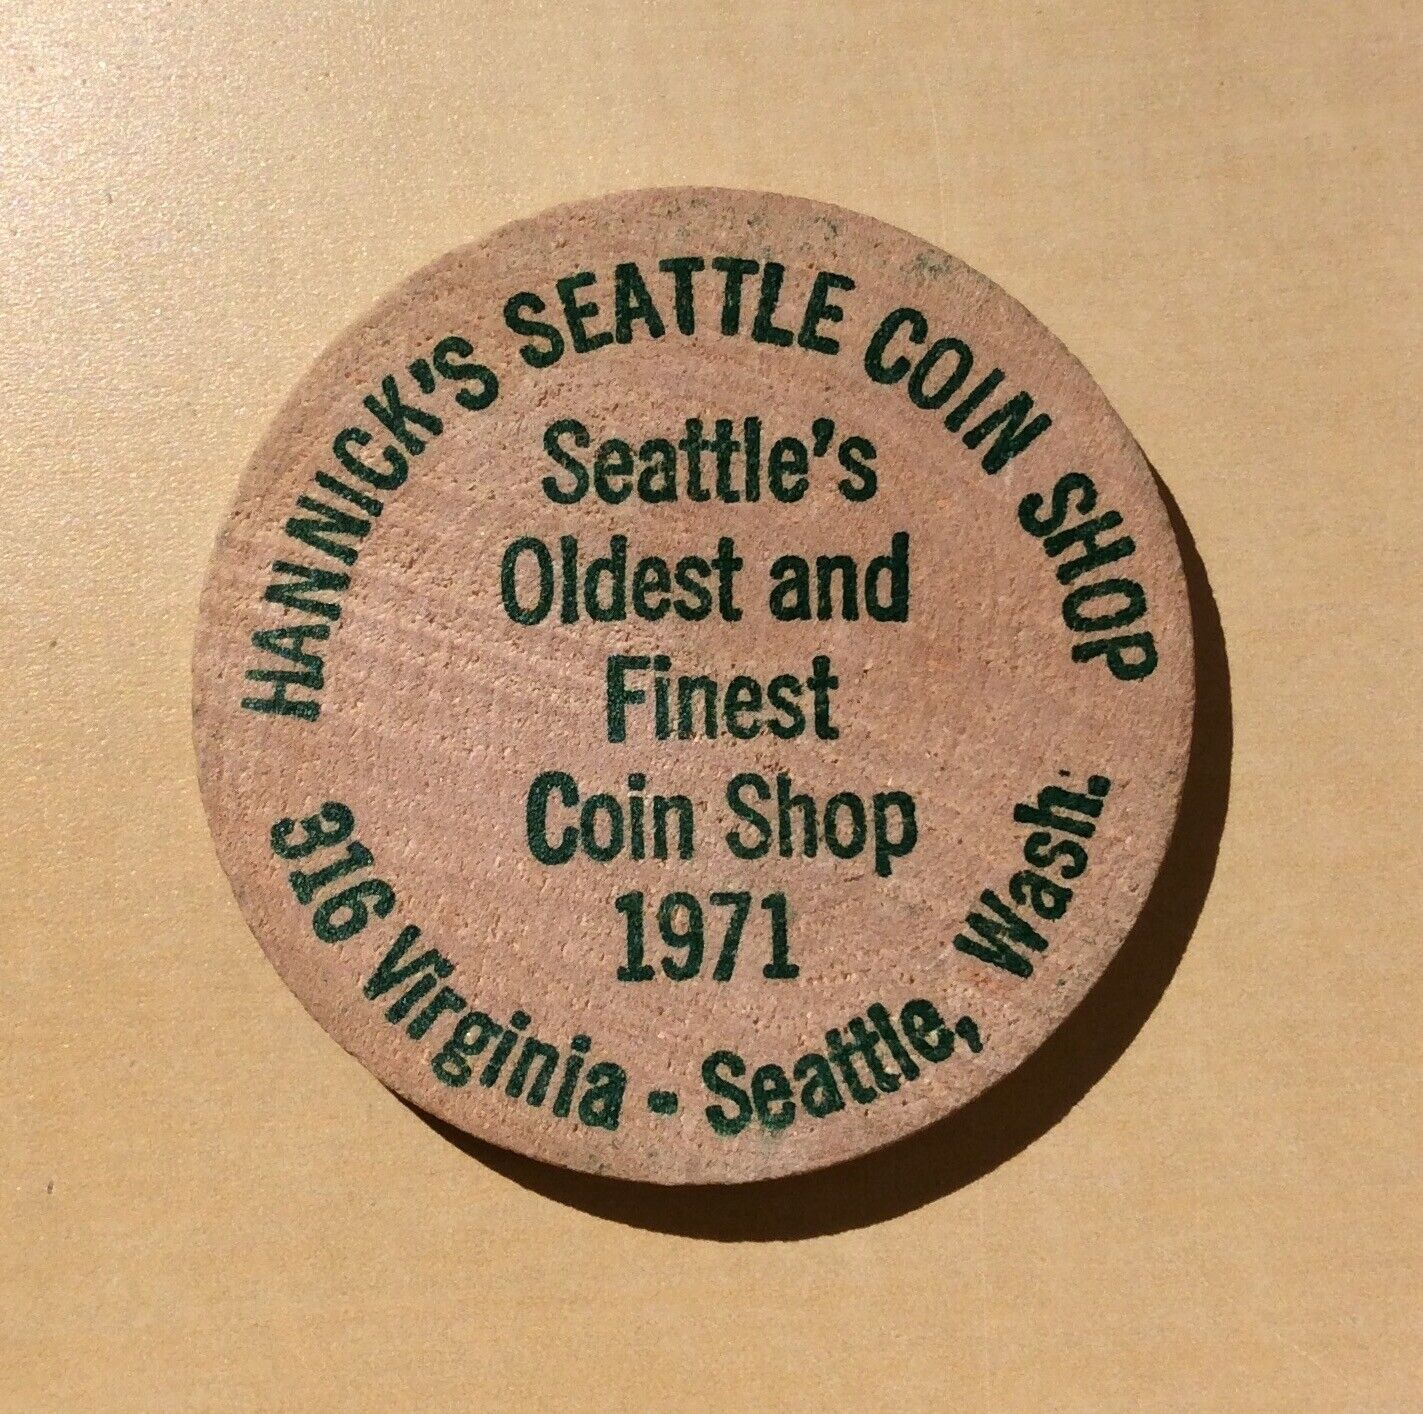 Hannick's Seattle Coin Shop 1971 Oldest And Finest Usa - Wooden Nickel